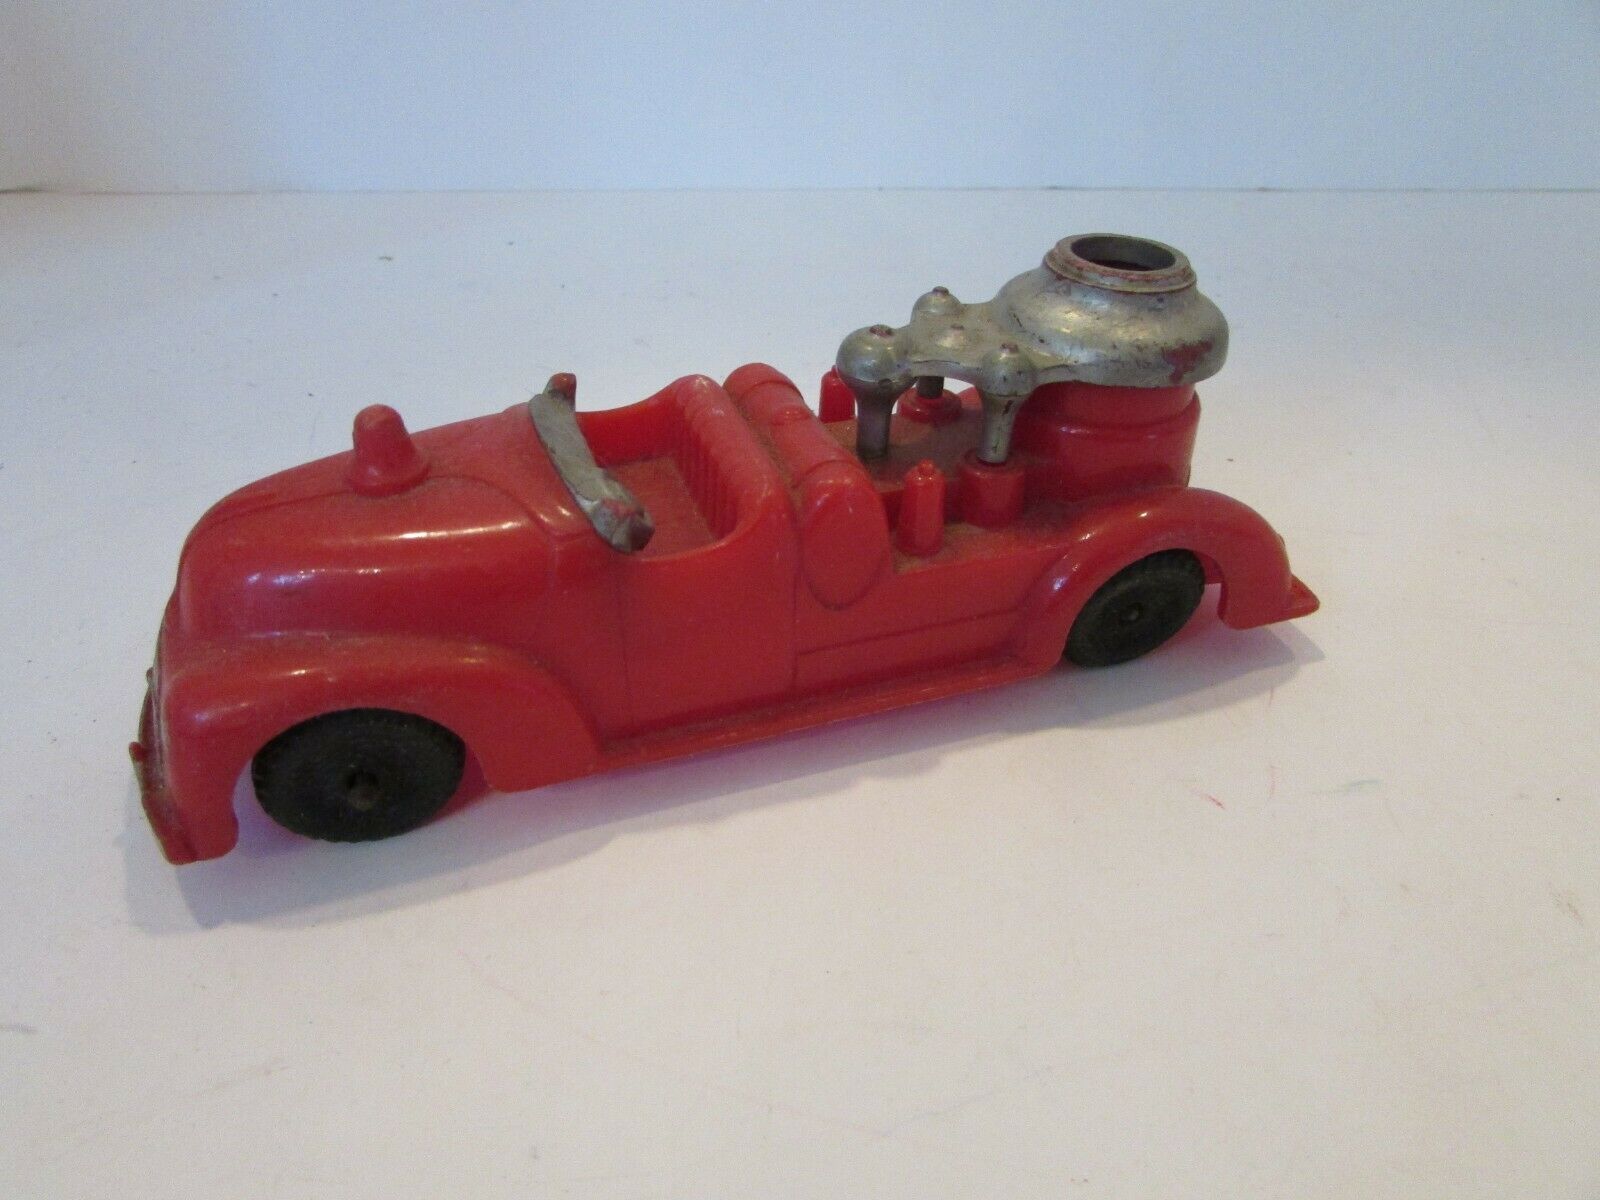 VTG HUBLEY KIDDIETOY FIRE TRUCK PLASTIC AS IS 5.75"L MADE IN USA   H2 - $3.62